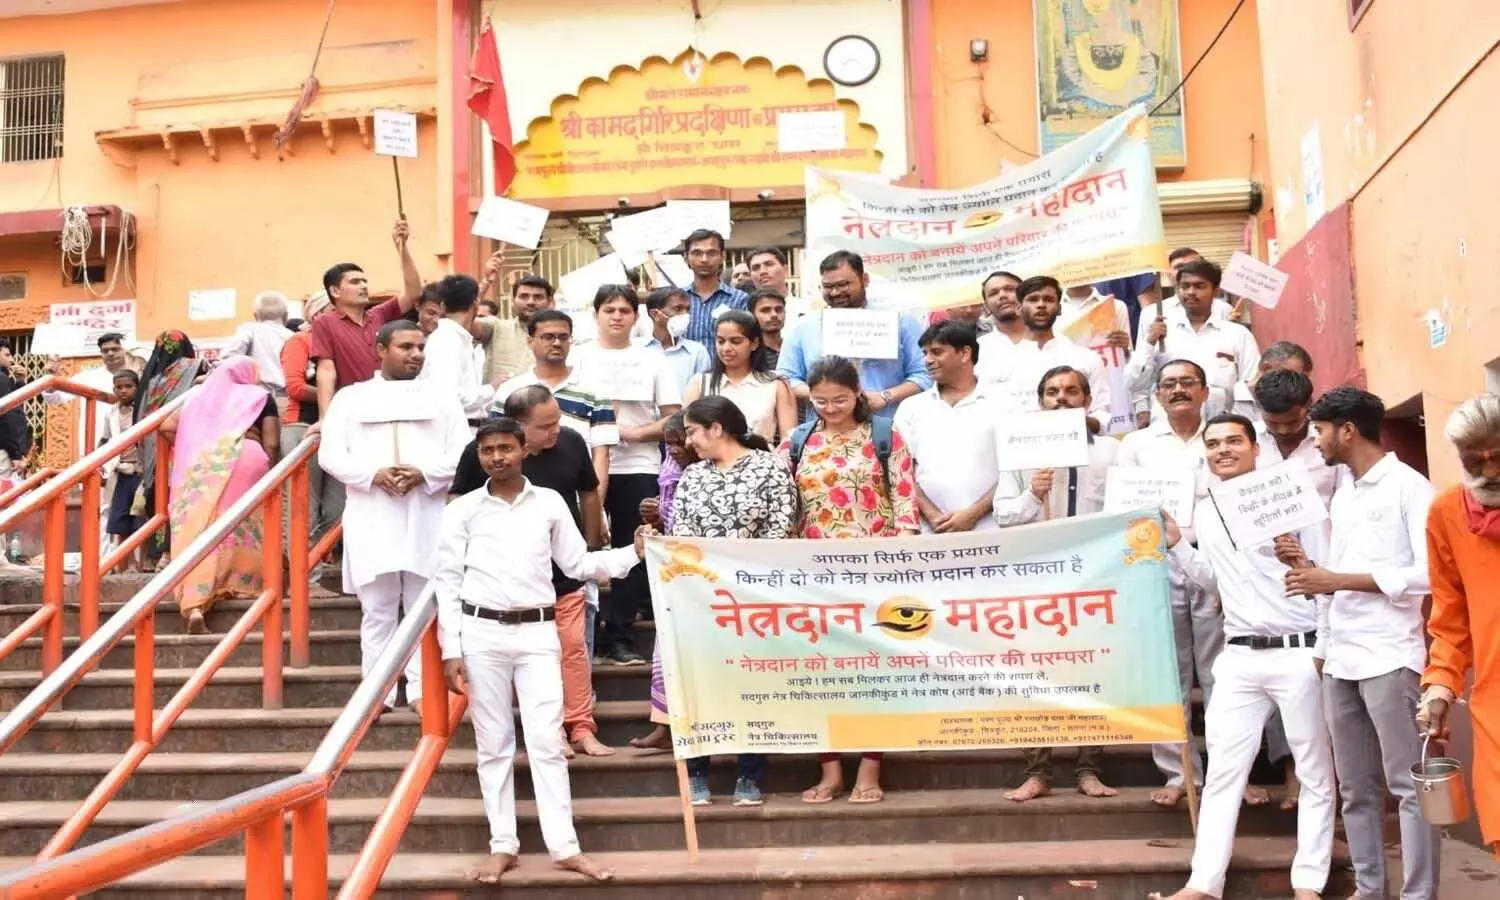 Eye donation awareness rally in Dharmanagari Chitrakoot, people were told the importance of eye donation